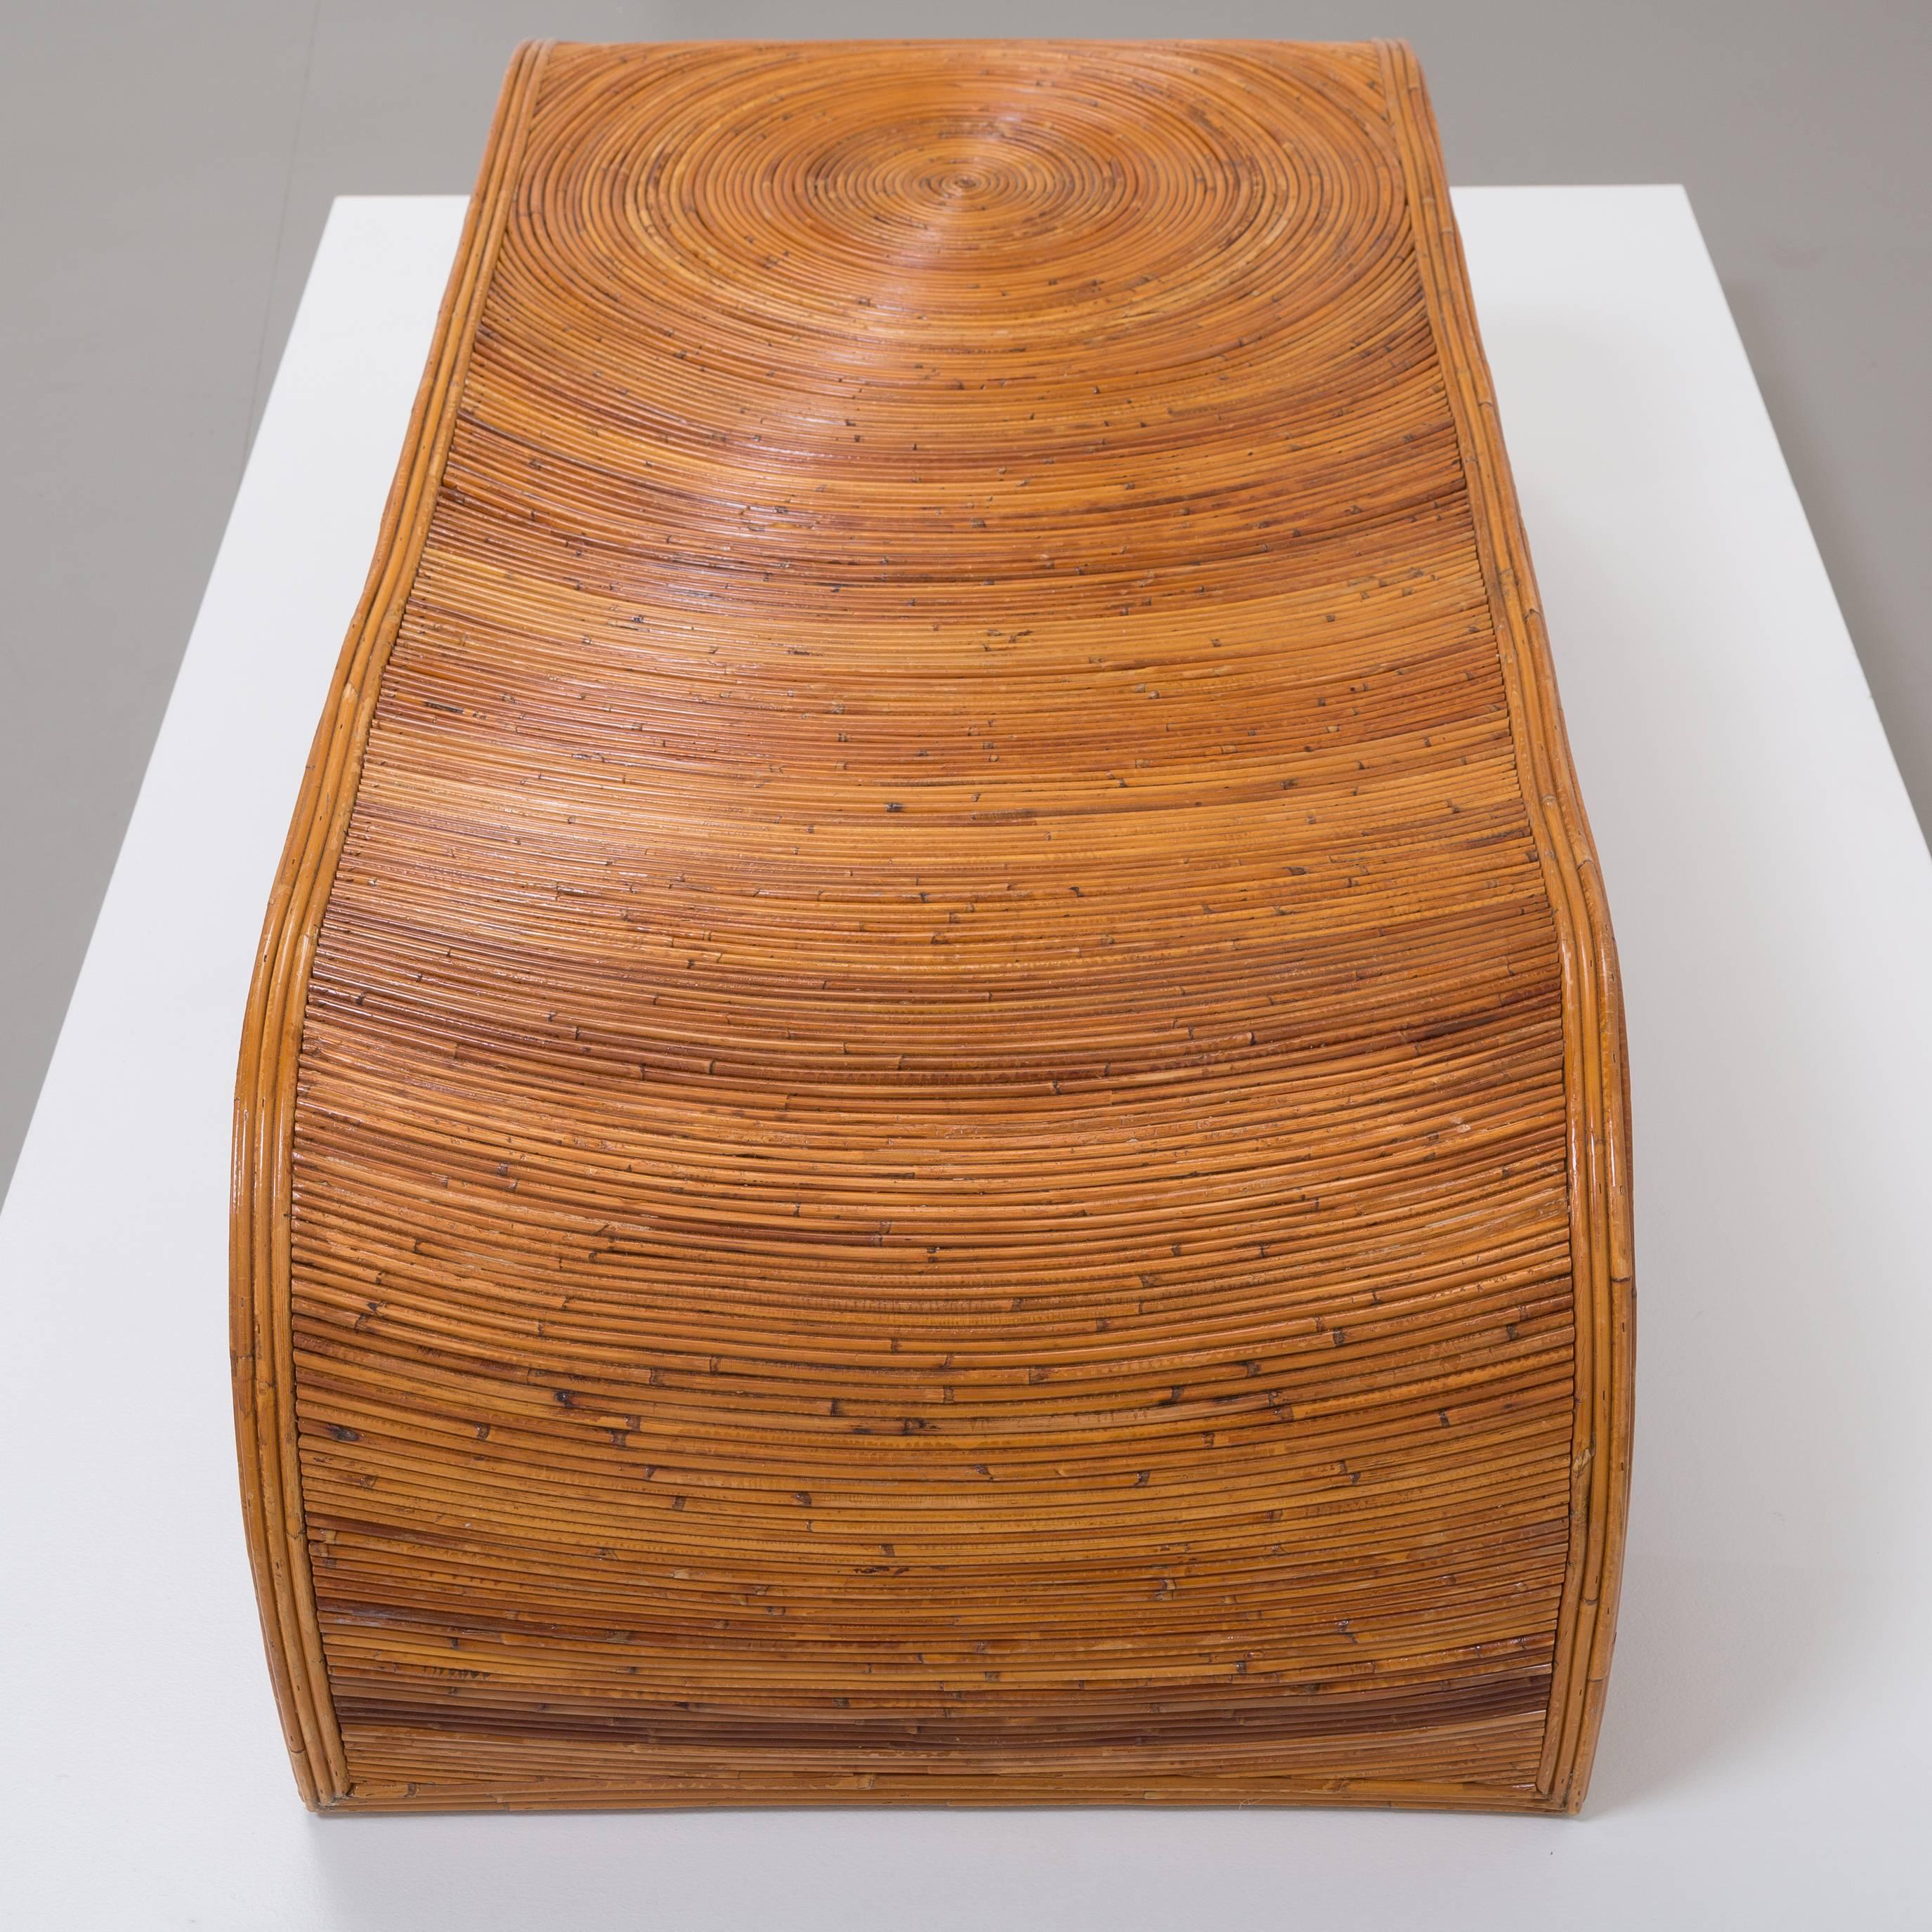 20th Century Gabriella Crespi Attributed Waterfall Bamboo Coffee Table, 1970s